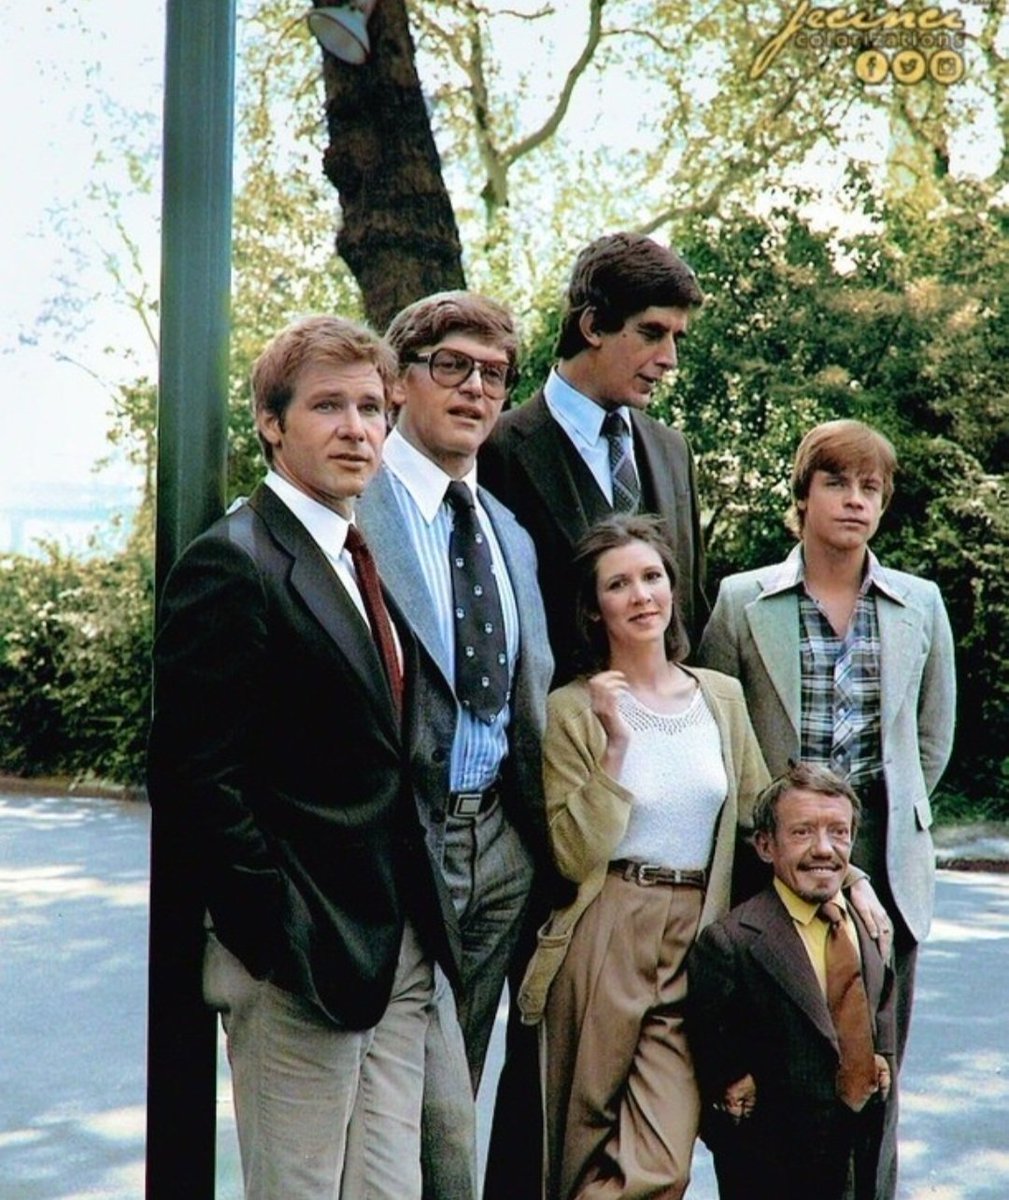 Science break, Sci-fi. 
The cast of Star Wars out of costume in c. 1977. From left to right: Harrison Ford (Han Solo), David Prowse (Darth Vader), Peter Mayhew (Chewbacca), Carrie Fisher (Princess Leia), Kenny Baker (R2-D2), and Mark Hamill (Luke Skywalker). https://t.co/1CsNB7GjKg